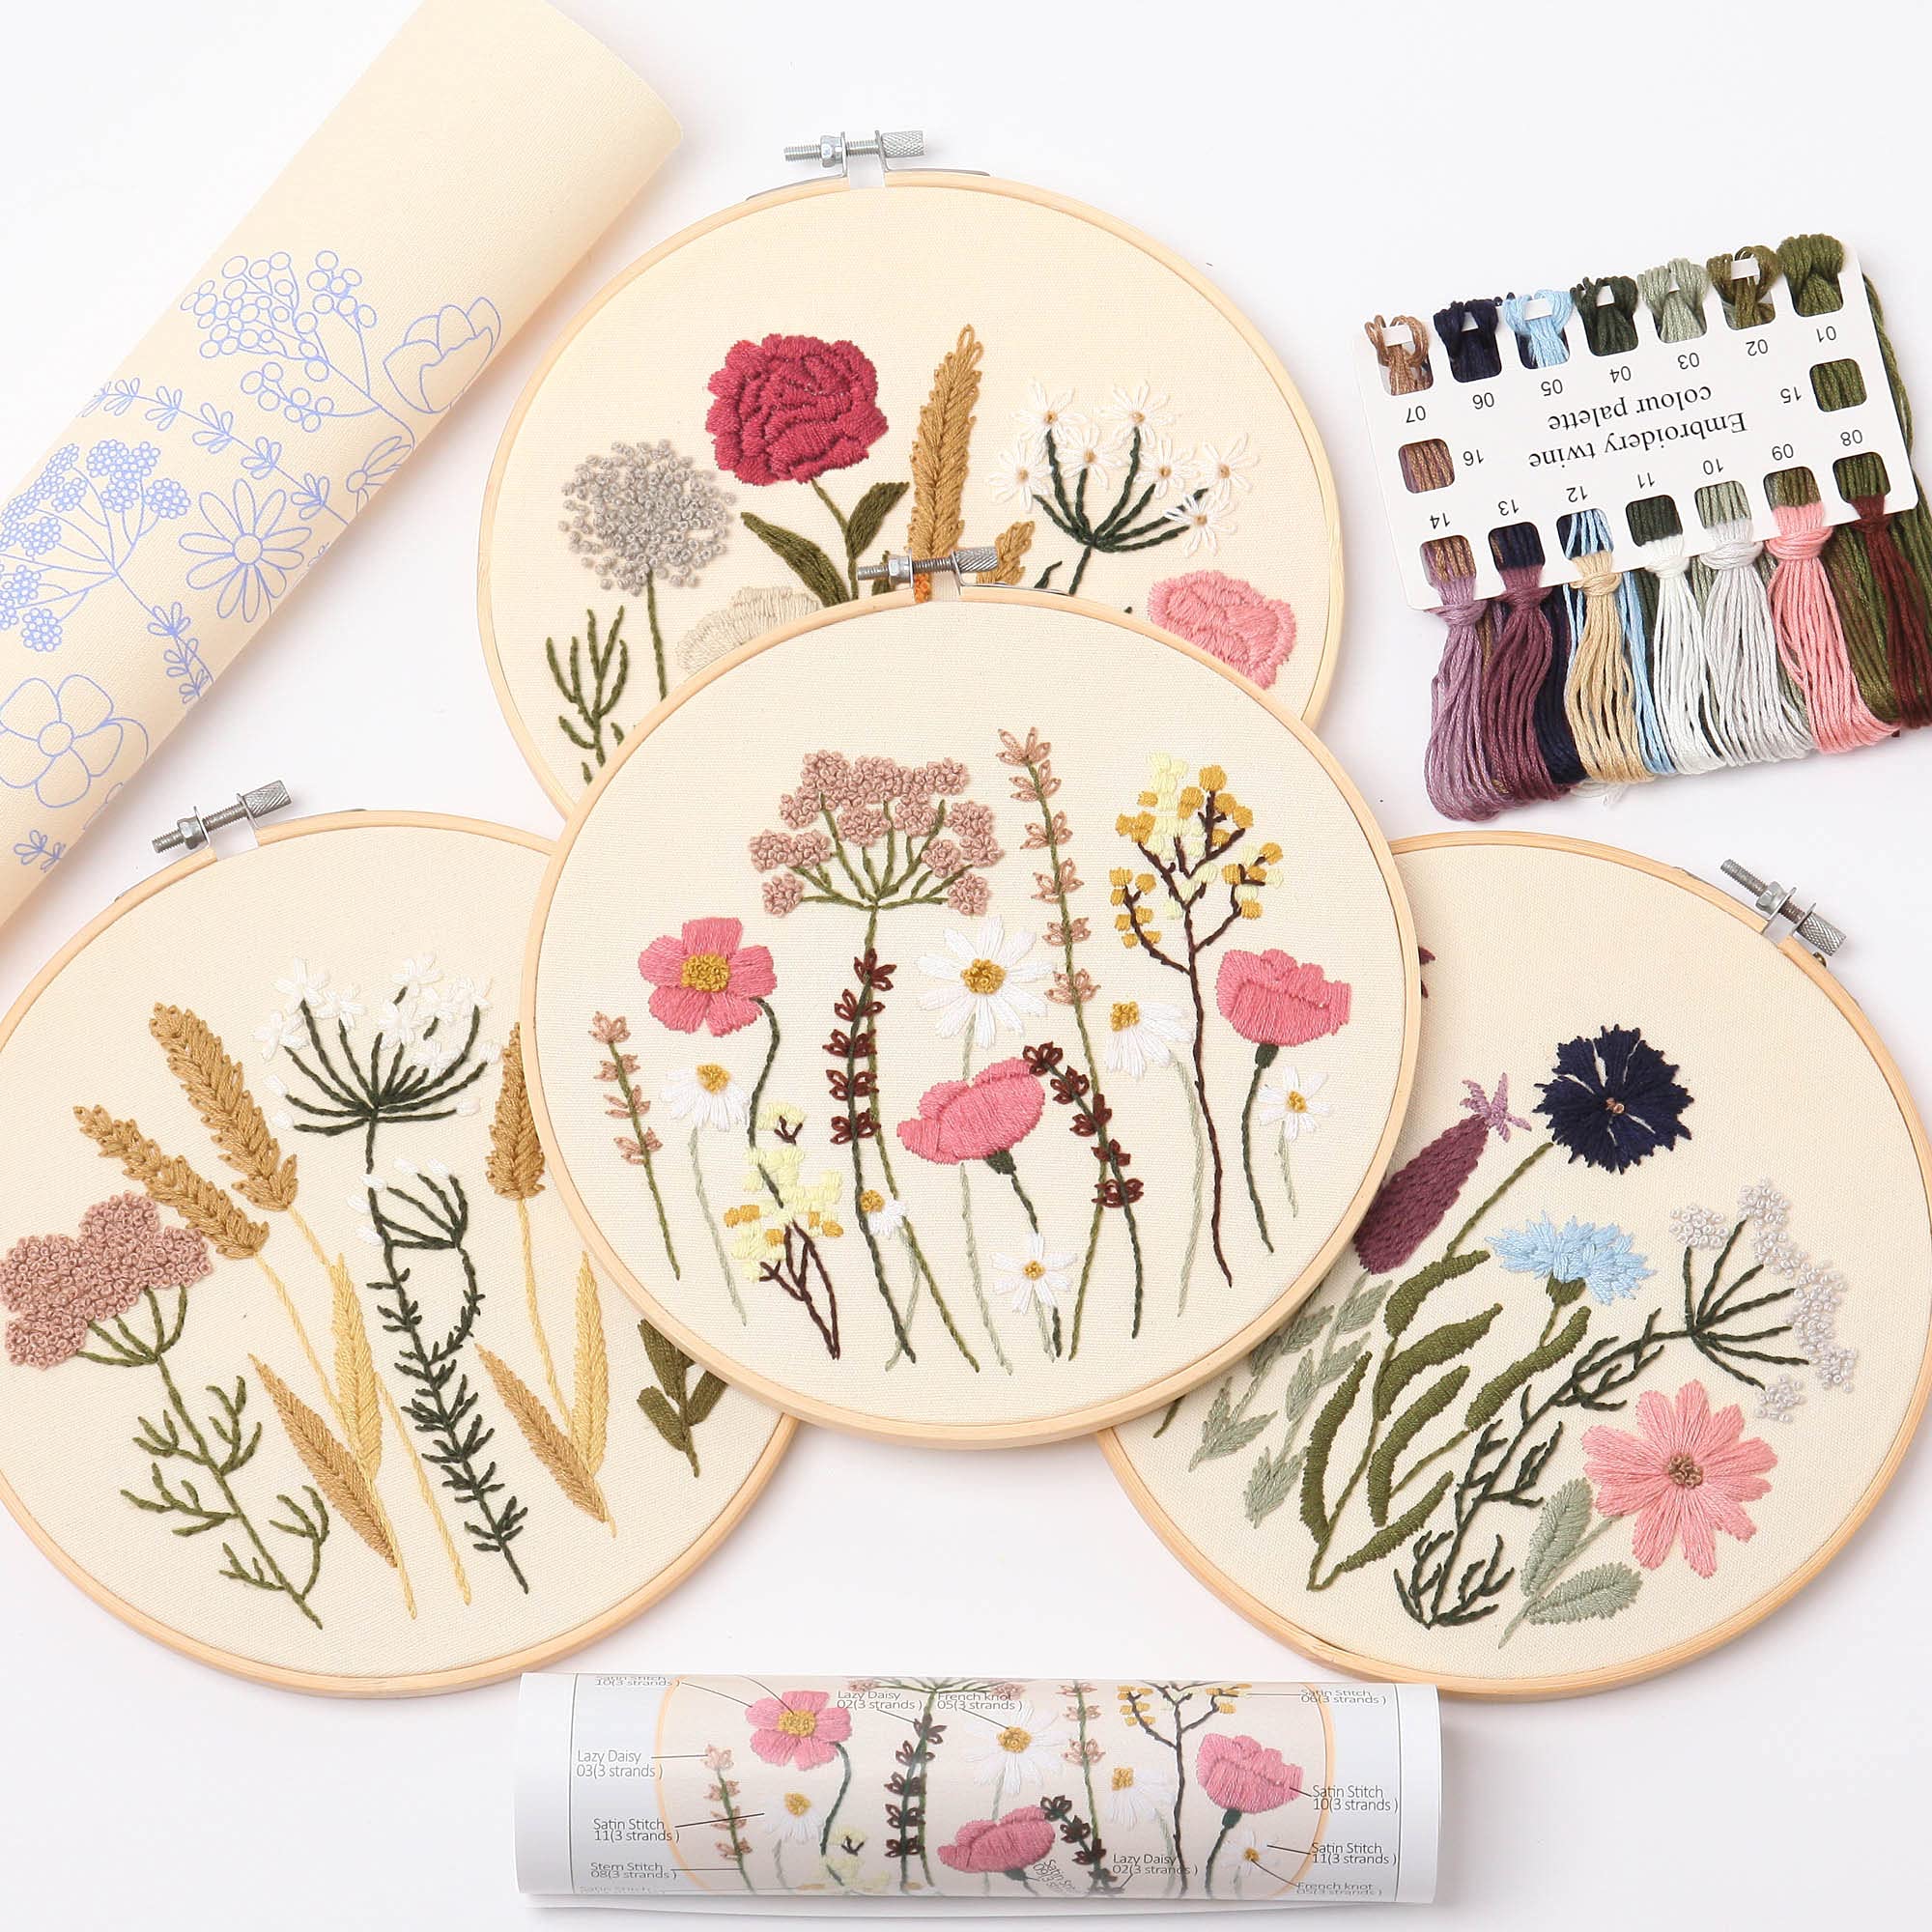 REEWISLY Embroidery Kit for Beginners 4 Sets Hand DIY Cross Stitch Kits 4  pcs Embroidery Hoop 4 pcs Plants Flowers Embroidery Patterns and Threads  Easy for The Embroidery Beginners to Learn Kit S366